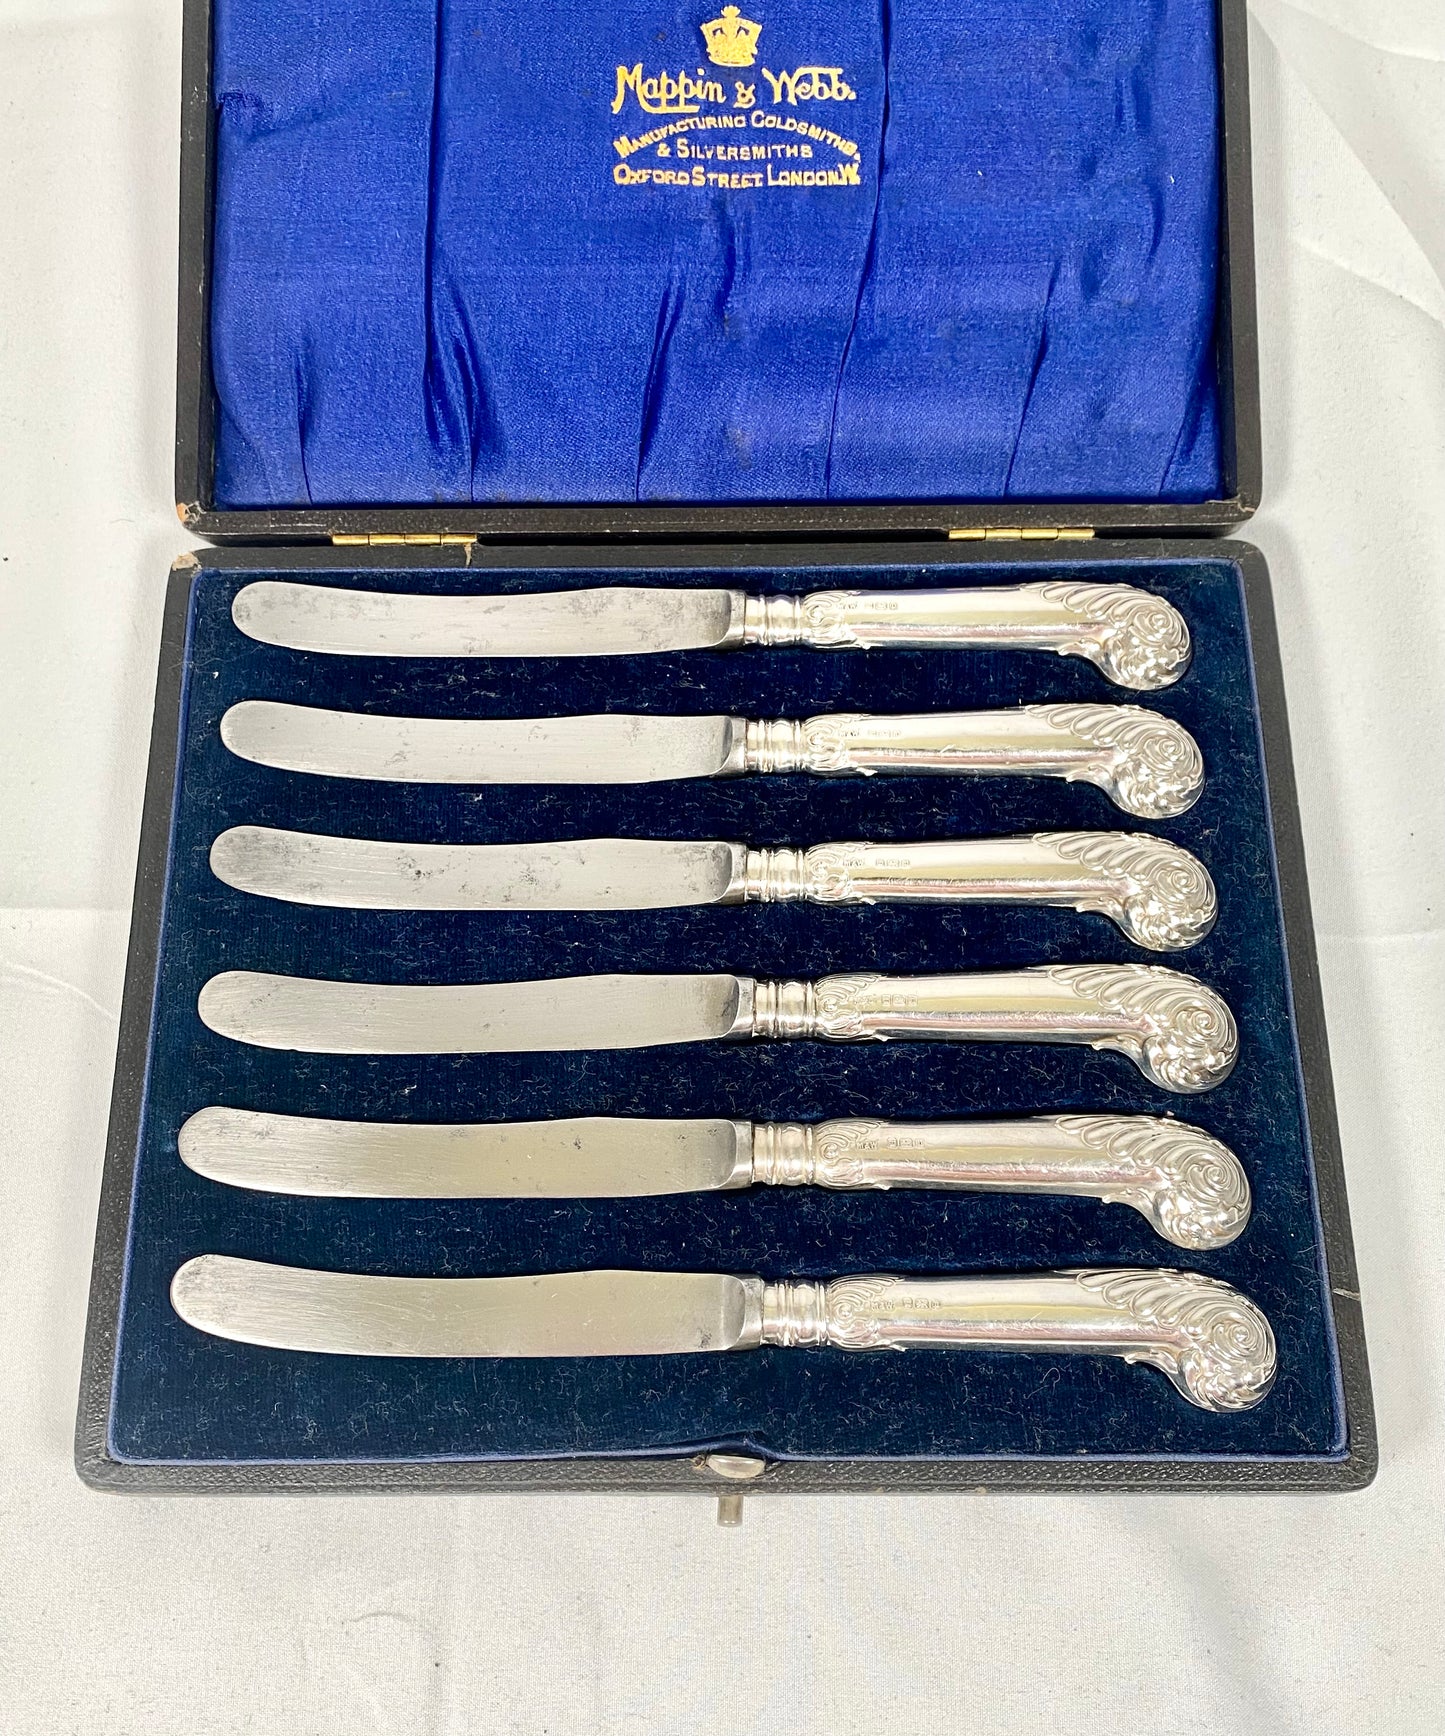 Antique Edwardian Cased Mappin & Webb Sheffield Steel Knives with Sterling Silver Handles, Set of 6